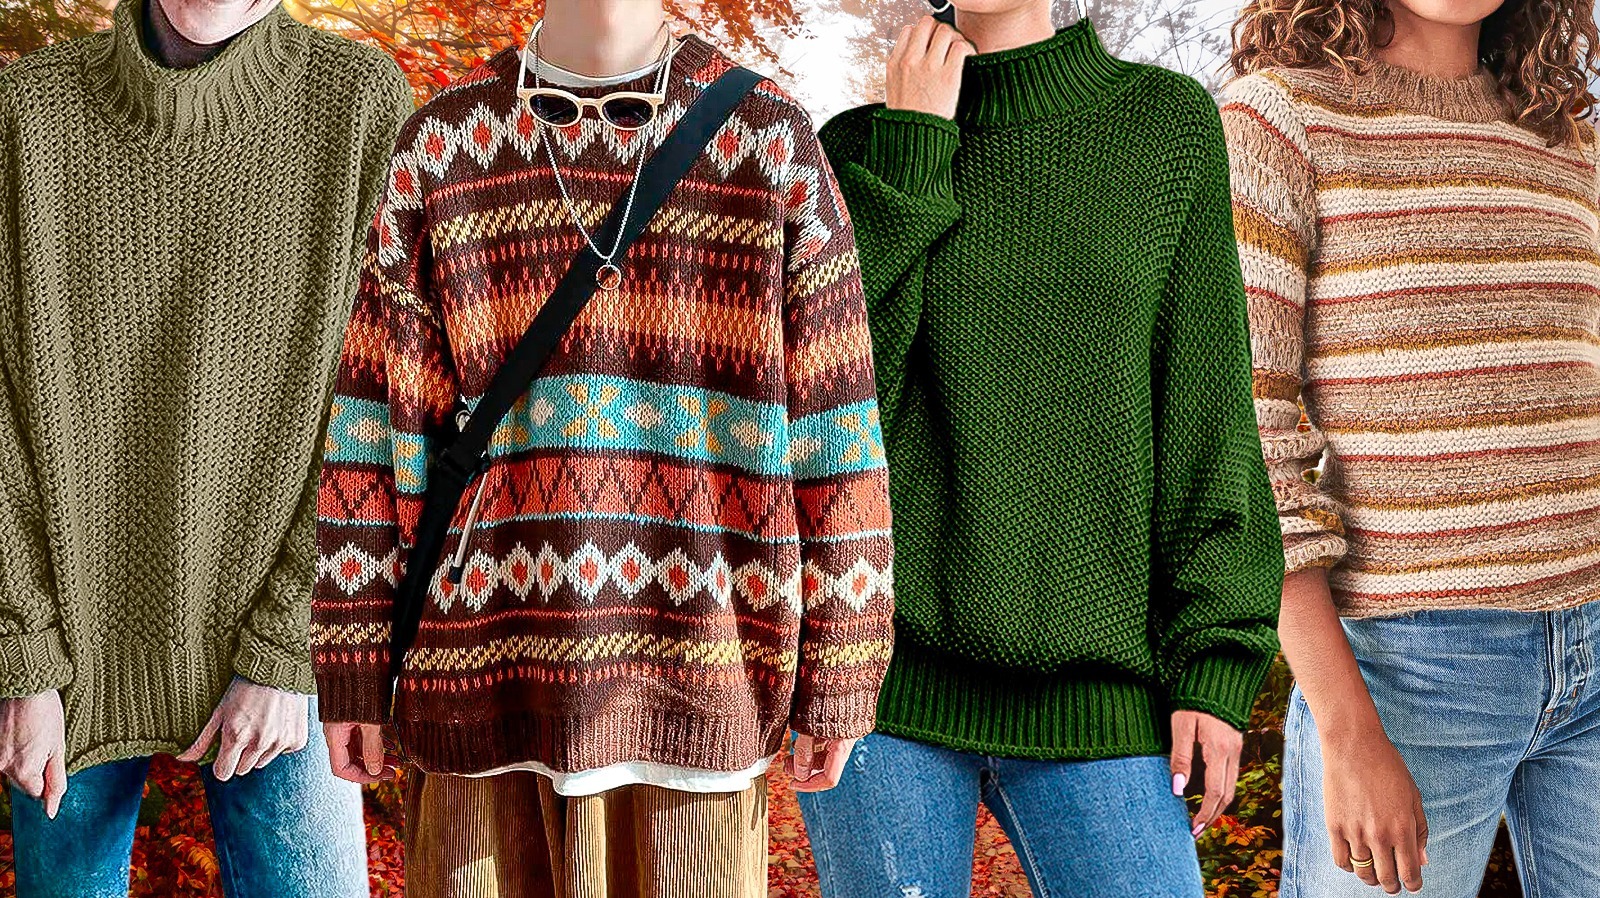 Sweater Weather Is Nearly Upon Us - Here Are Our Favorite Styles For ...